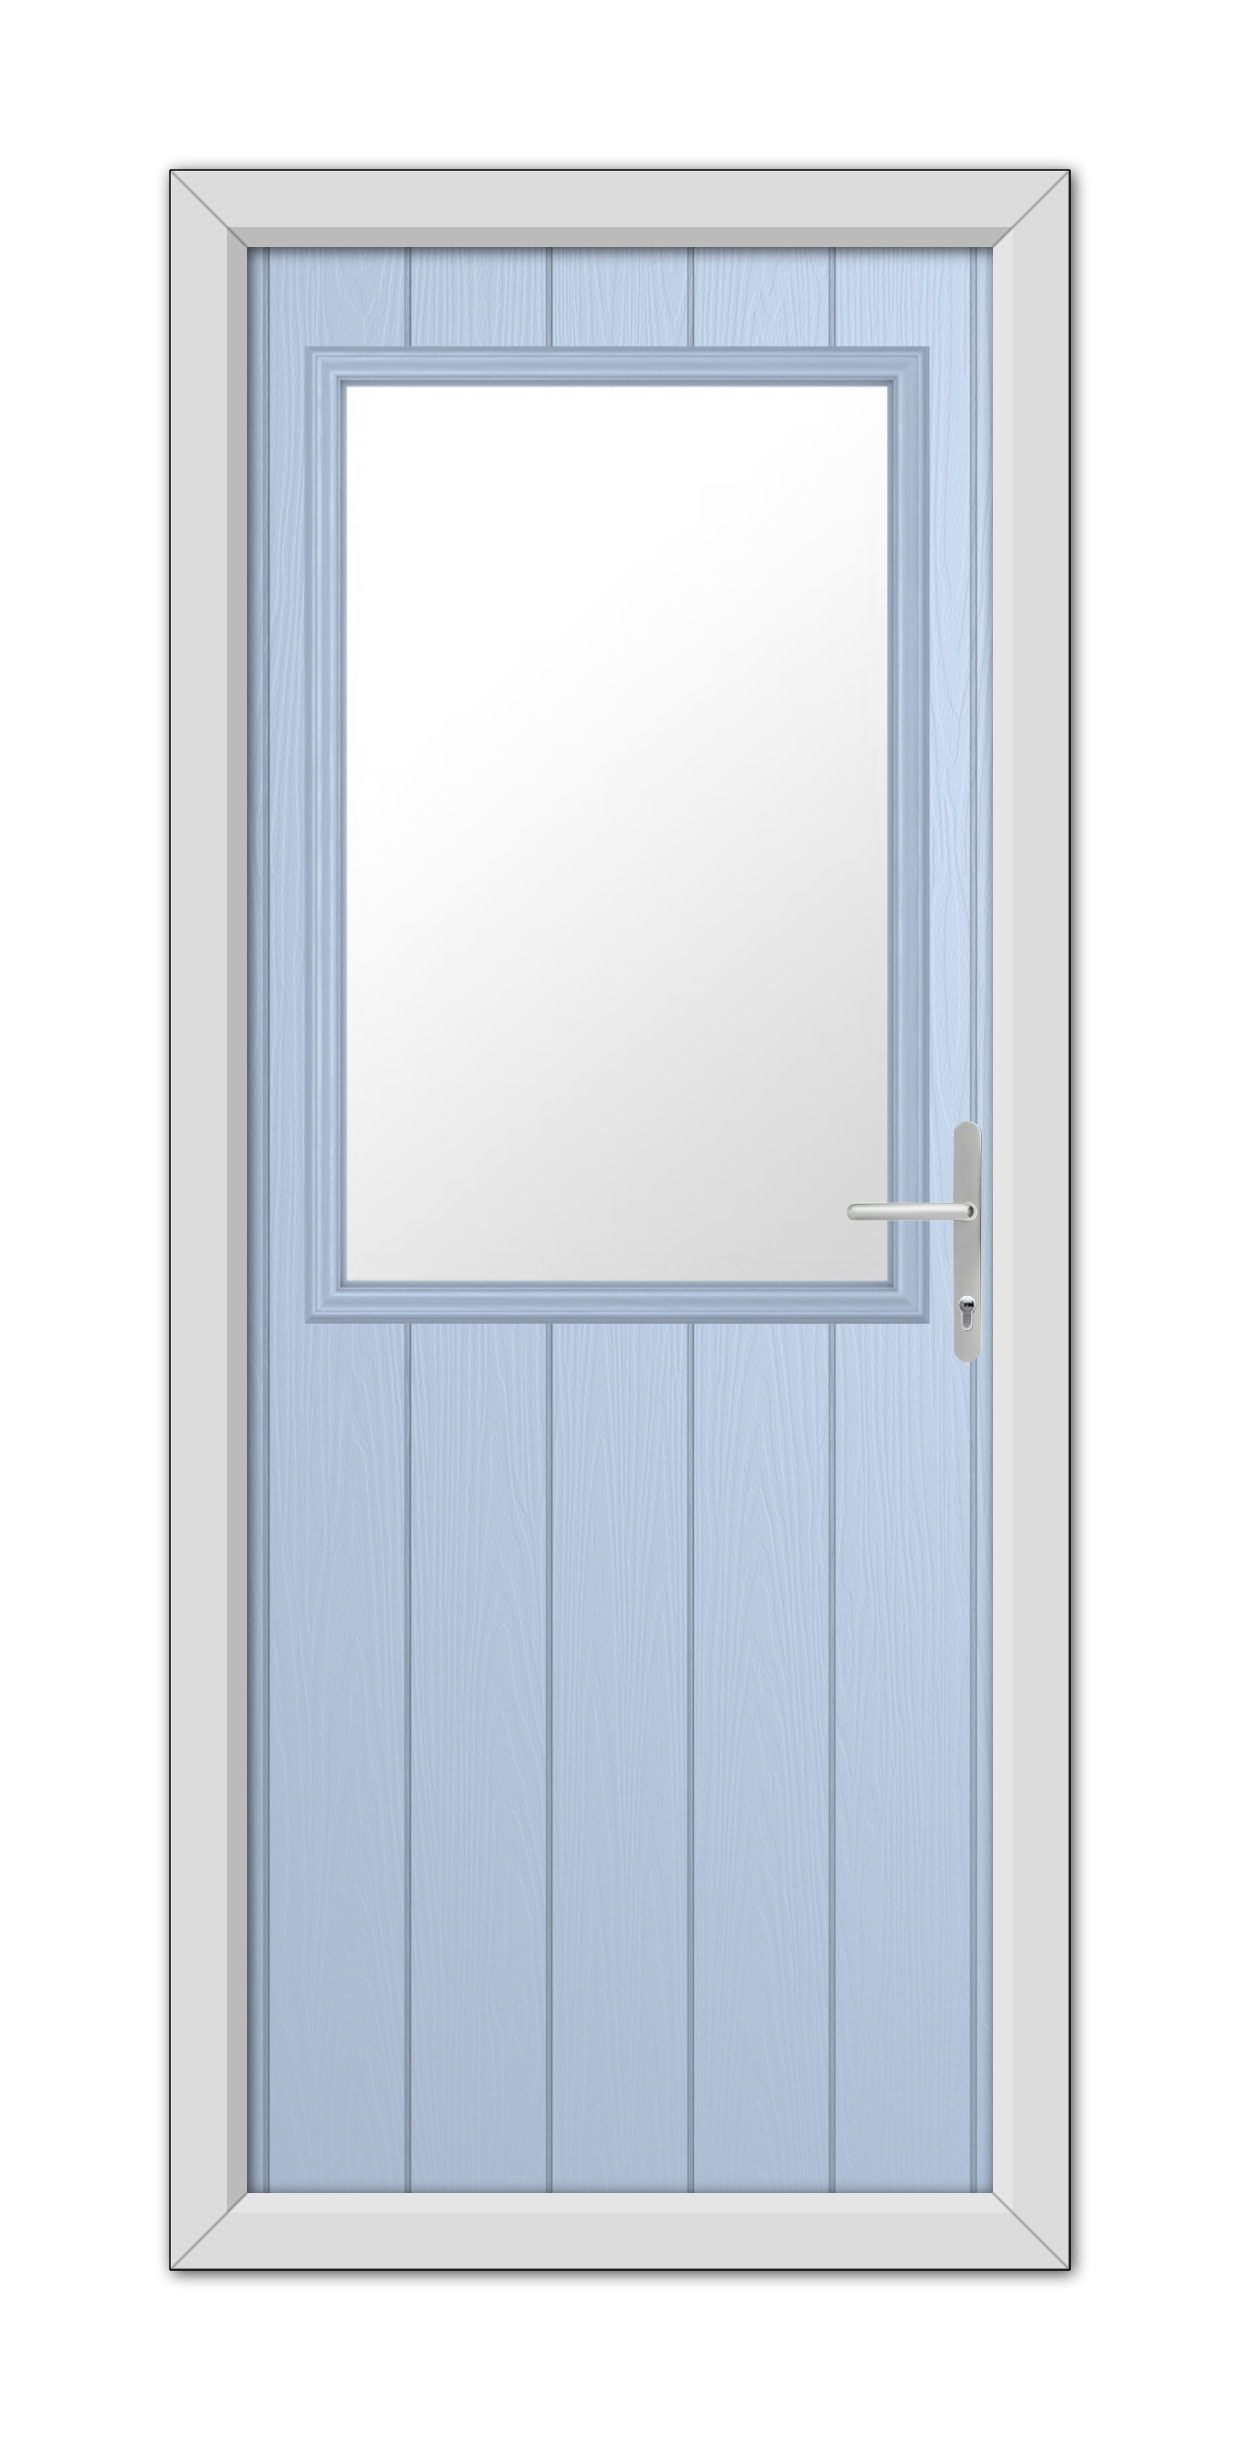 A Duck Egg Blue Clifton Composite Door 48mm Timber Core with a large square glass window, framed in white, featuring a silver handle on the right side.